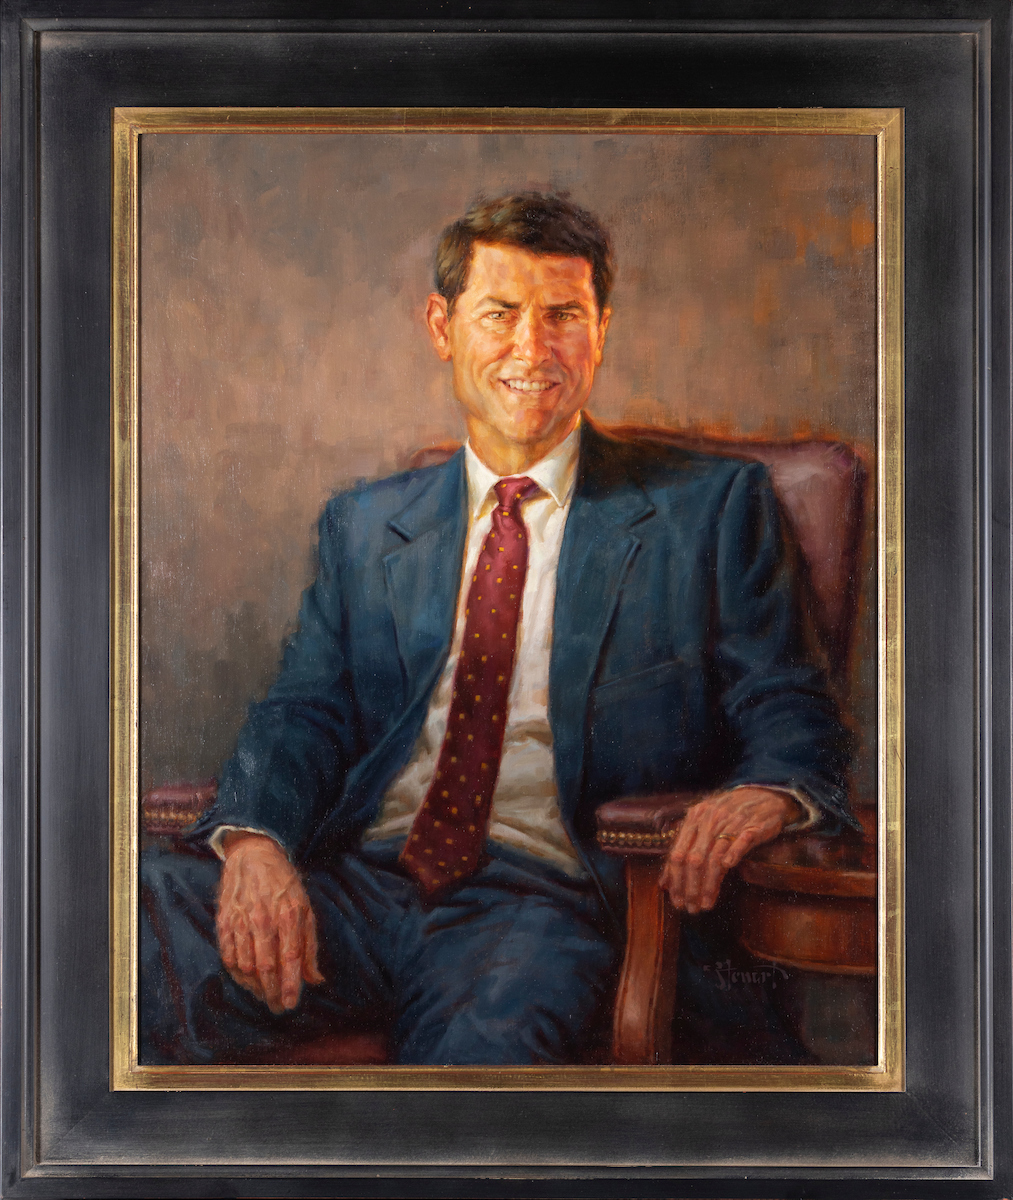 Portrait of Kerry D. Romesburg painted by Perry Stewart. In the portrait Romesburg is depicted as being seated in front of a muted background.